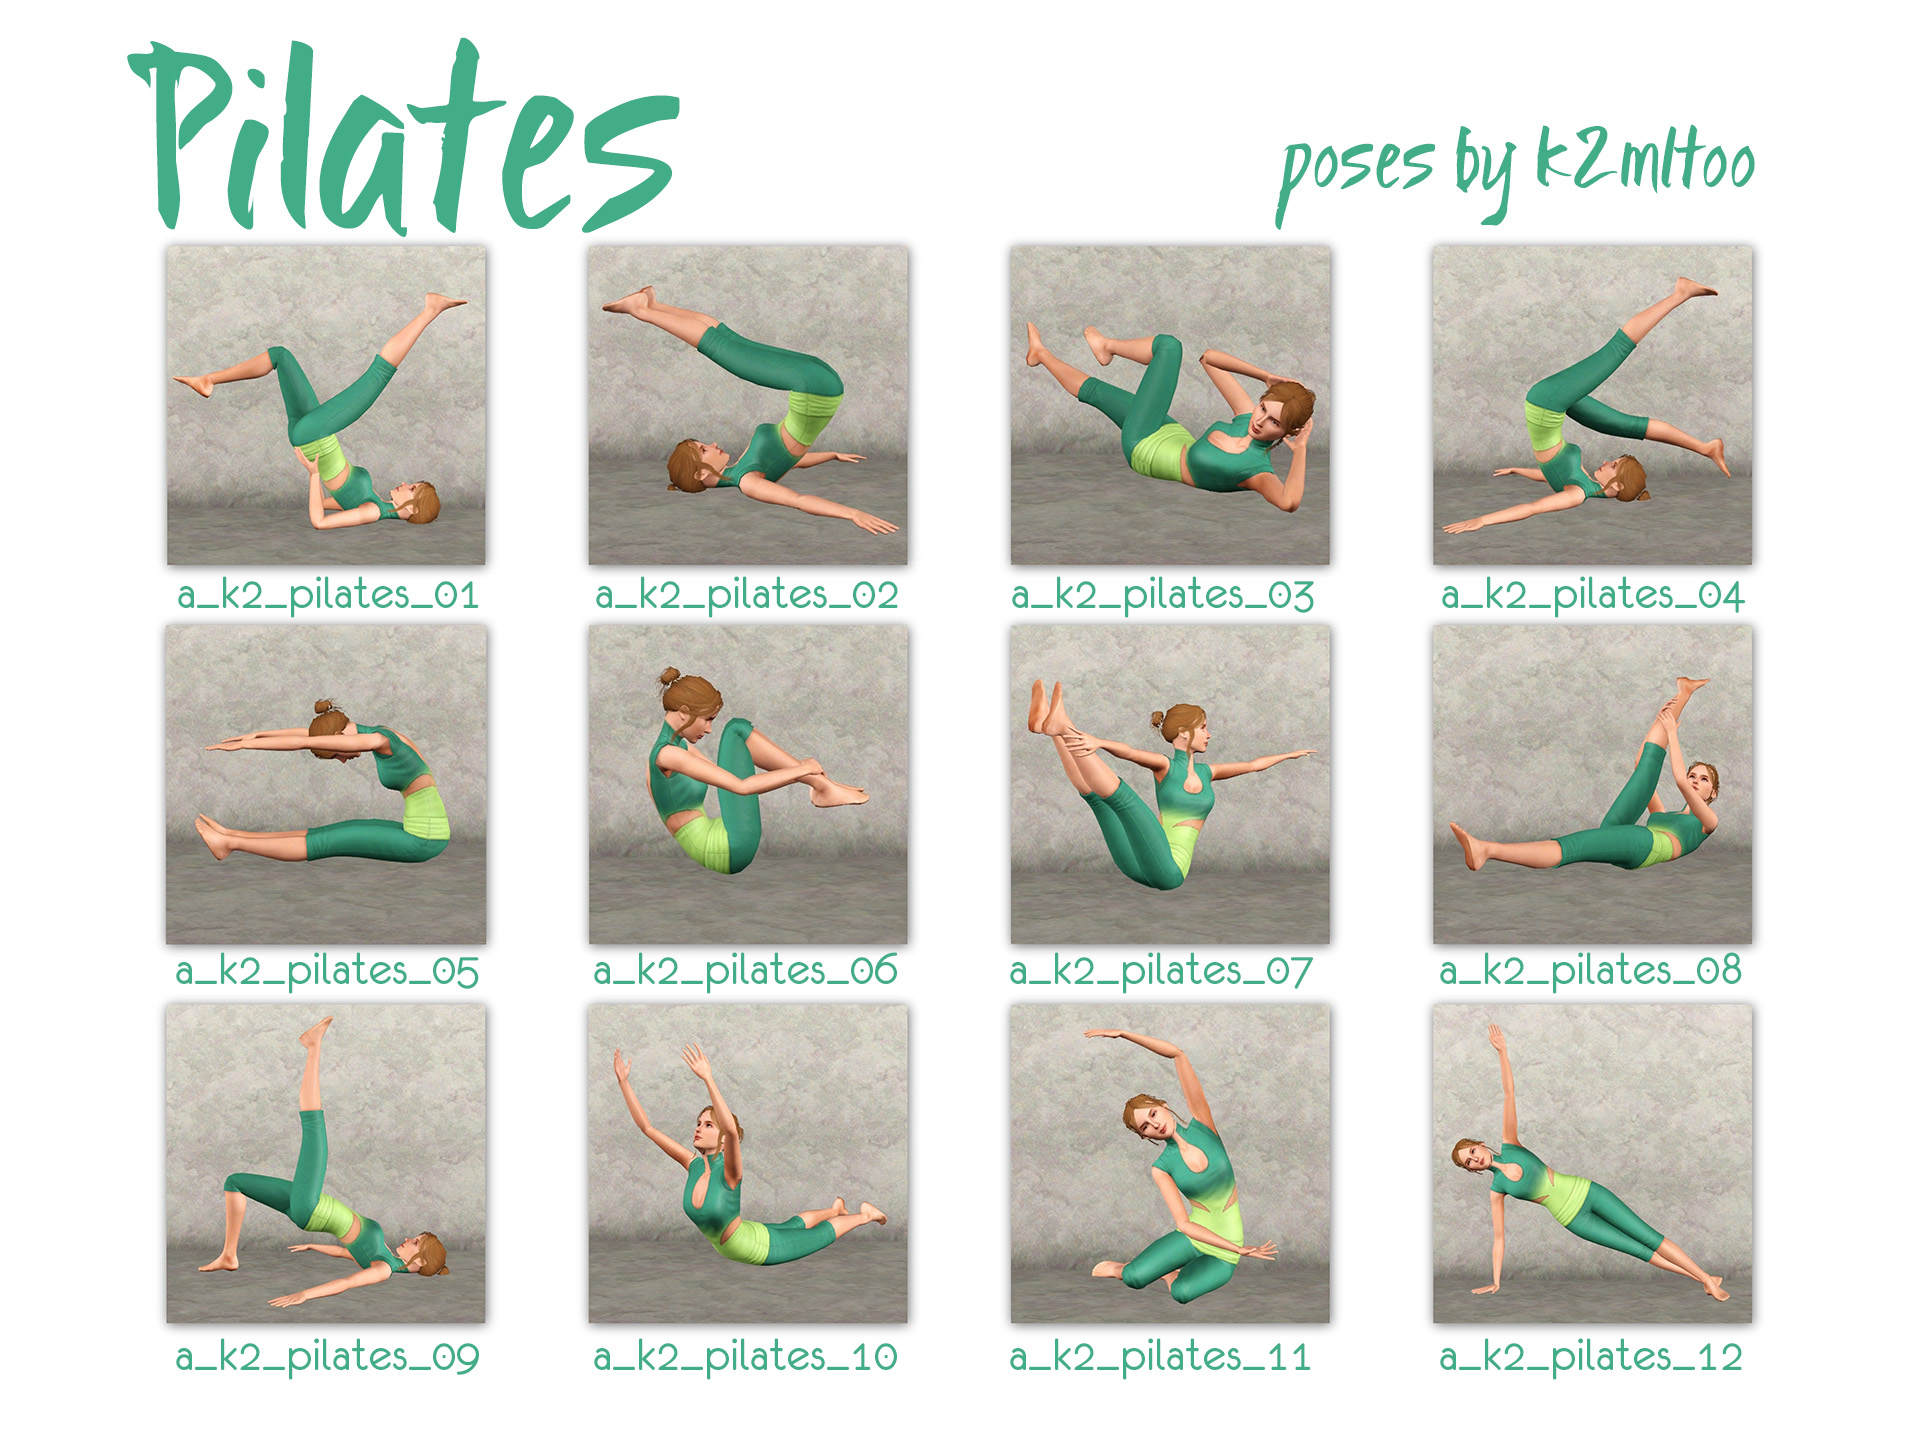 Pilates Exercise For Beginners & Plus Size: A Complete Step-by-Step Manual  for Beginners, Elderly and Plus-Sized People on Strengthening, Mobility,  Weight-loss and Balance, Among Other Things. : Lockman, Jaleel:  Amazon.co.uk: Books